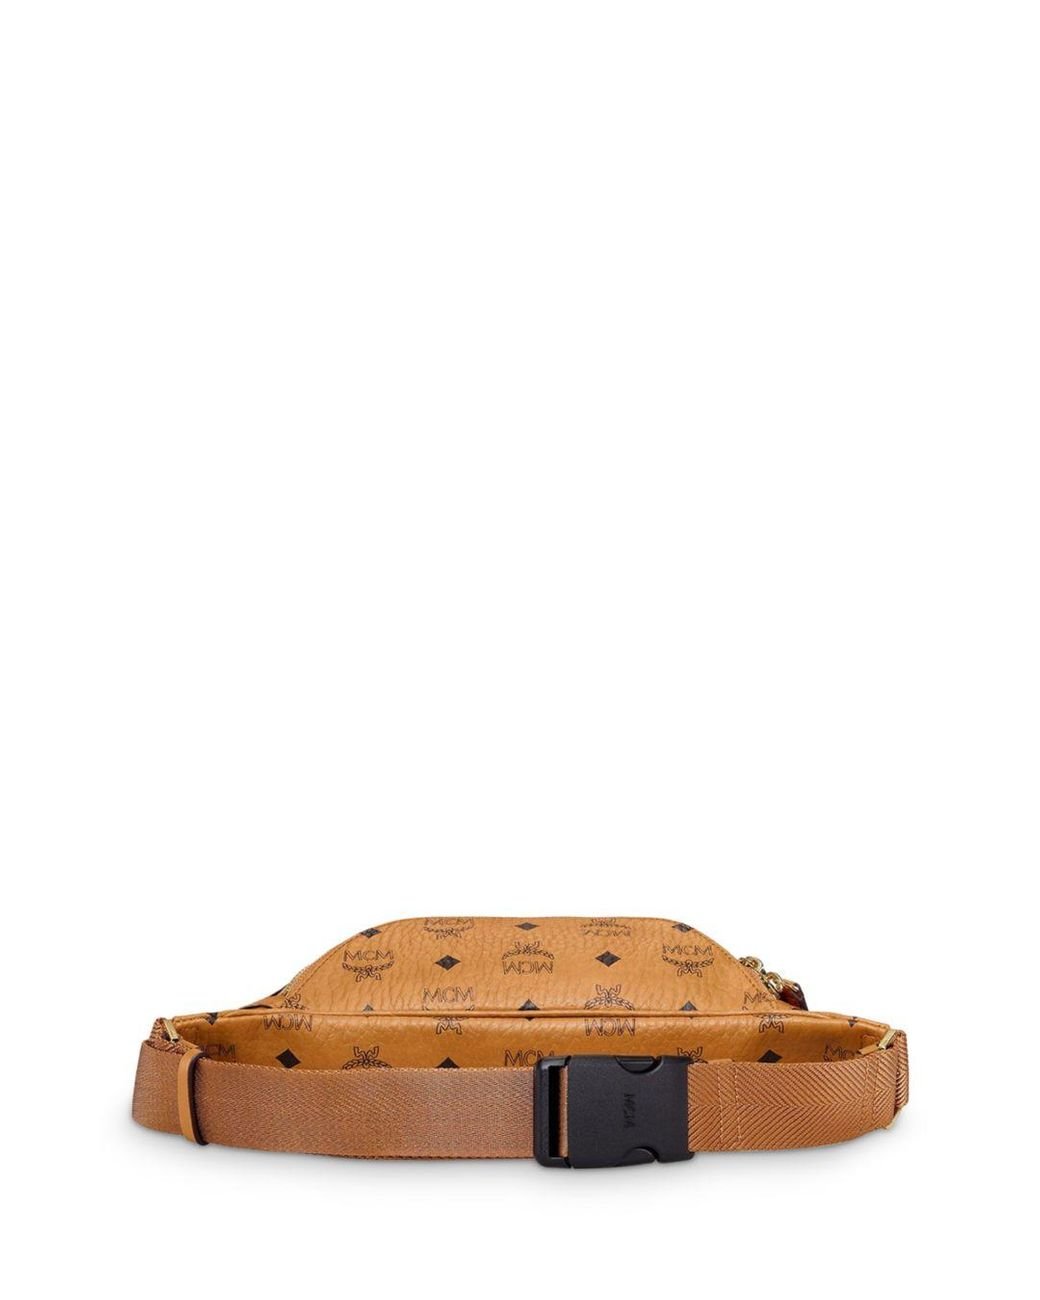 MCM Synthetic Small Visetos Belt Bag in Cognac (Brown) - Save 20 